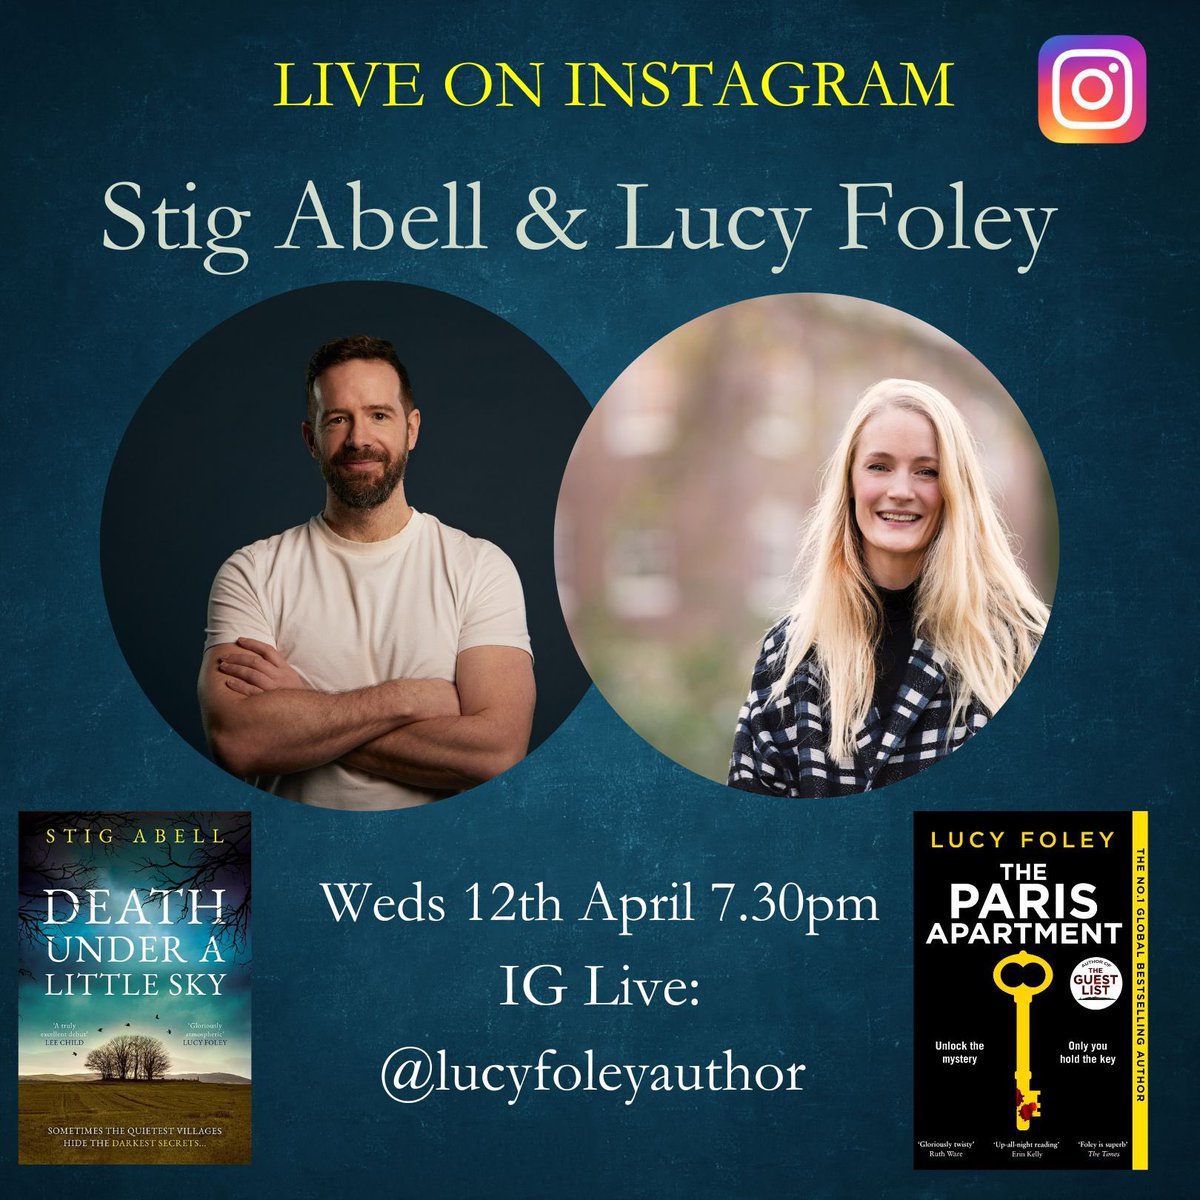 Excited to talk to @StigAbell about #DeathUnderALittleSky over on Instagram next week. Tune in if you’re looking for your next great read or just fancy hearing us chat about our favourite thrillers, heroes of the genre and top tips for writing crime: instagram.com/lucyfoleyautho…